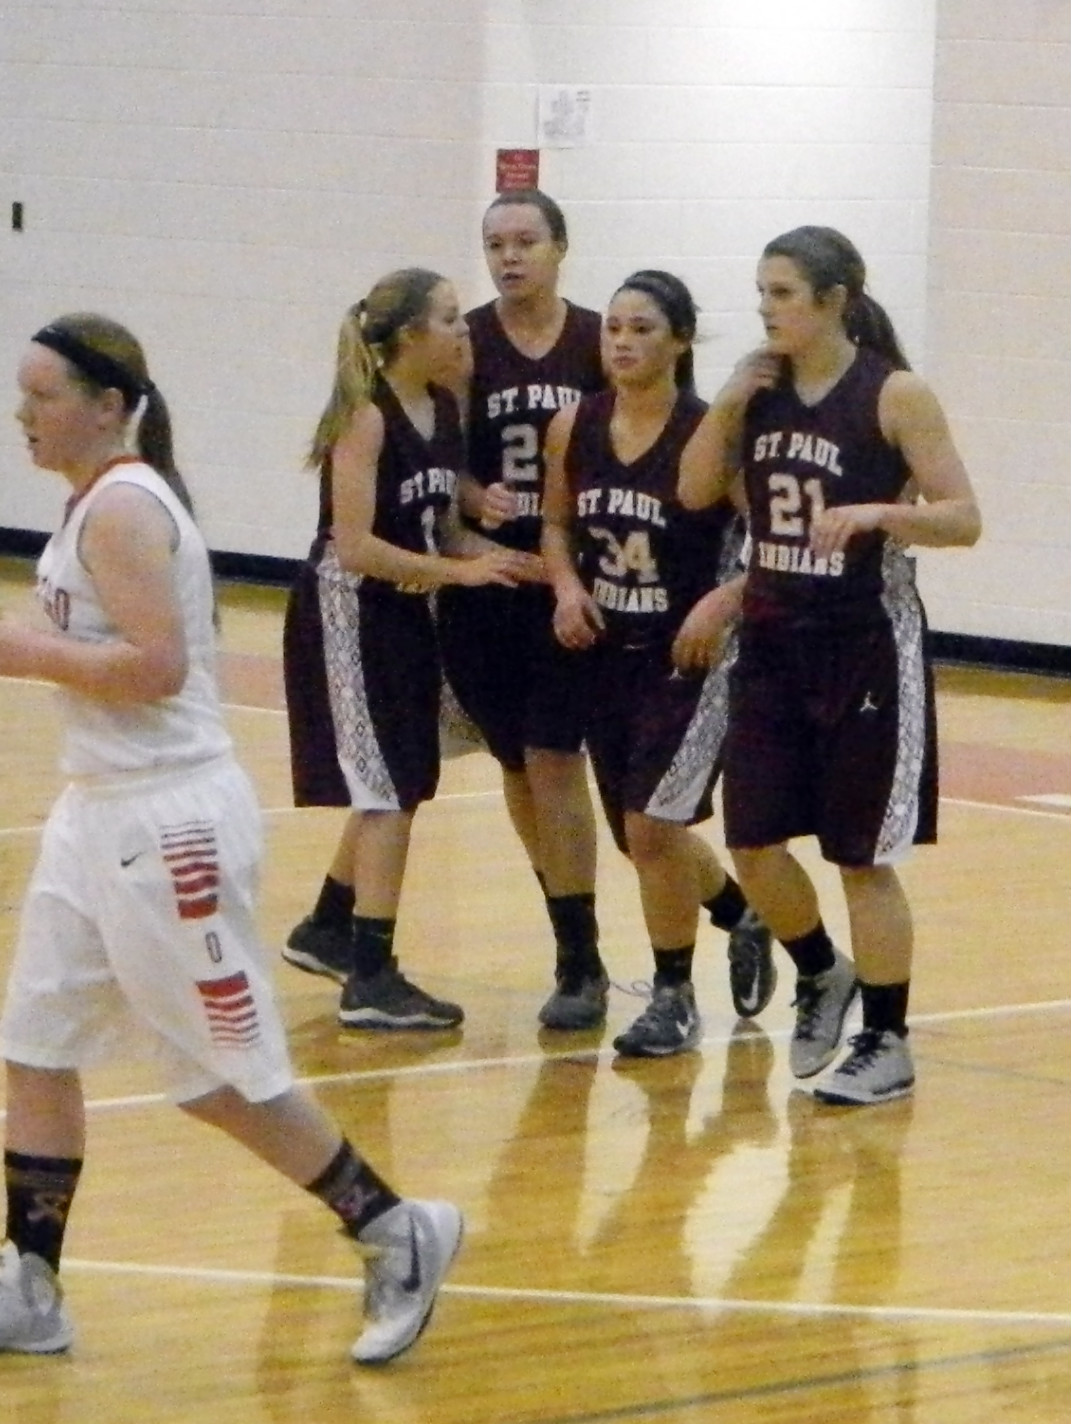 The Lady Indians proved dominant once again over Oswego on Tuesday night. Pictured (L to R in maroon) is Keyahnah Burk, high point scorer Holly Hutcherson, Raquel Rice, and Josie Albertini. 